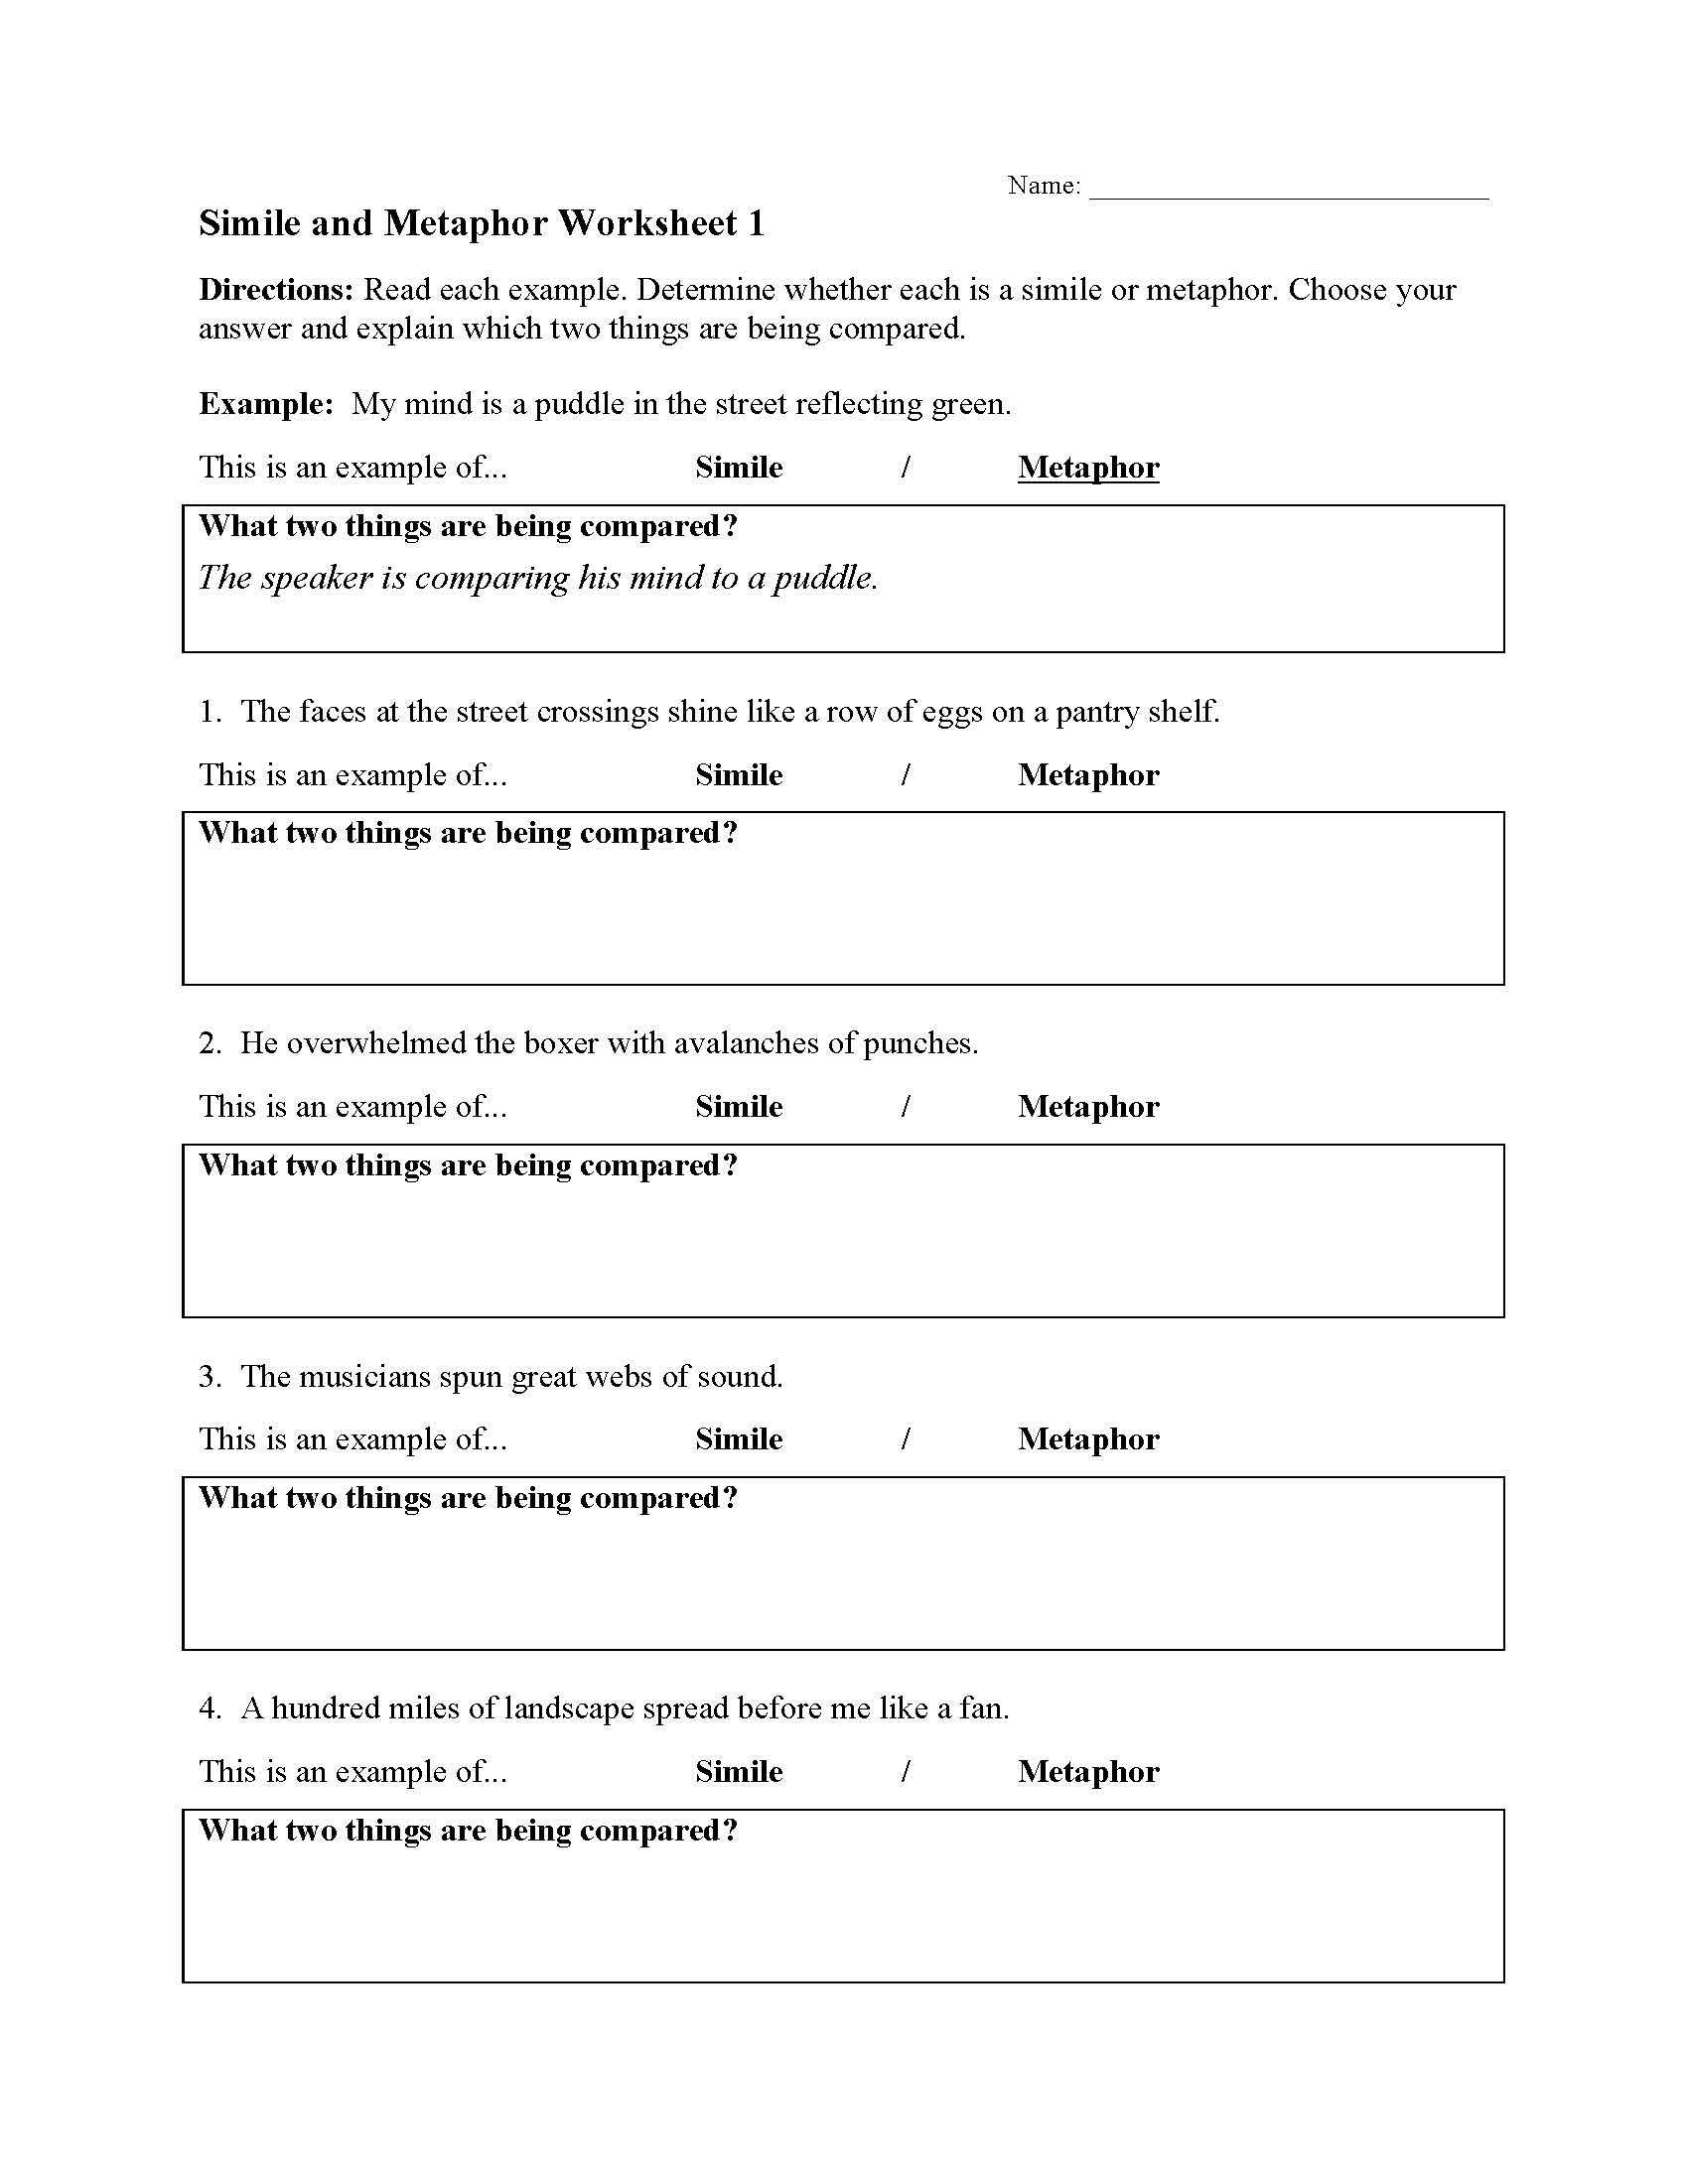 Simile and Metaphor Worksheets  Ereading Worksheets With Similes And Metaphors Worksheet